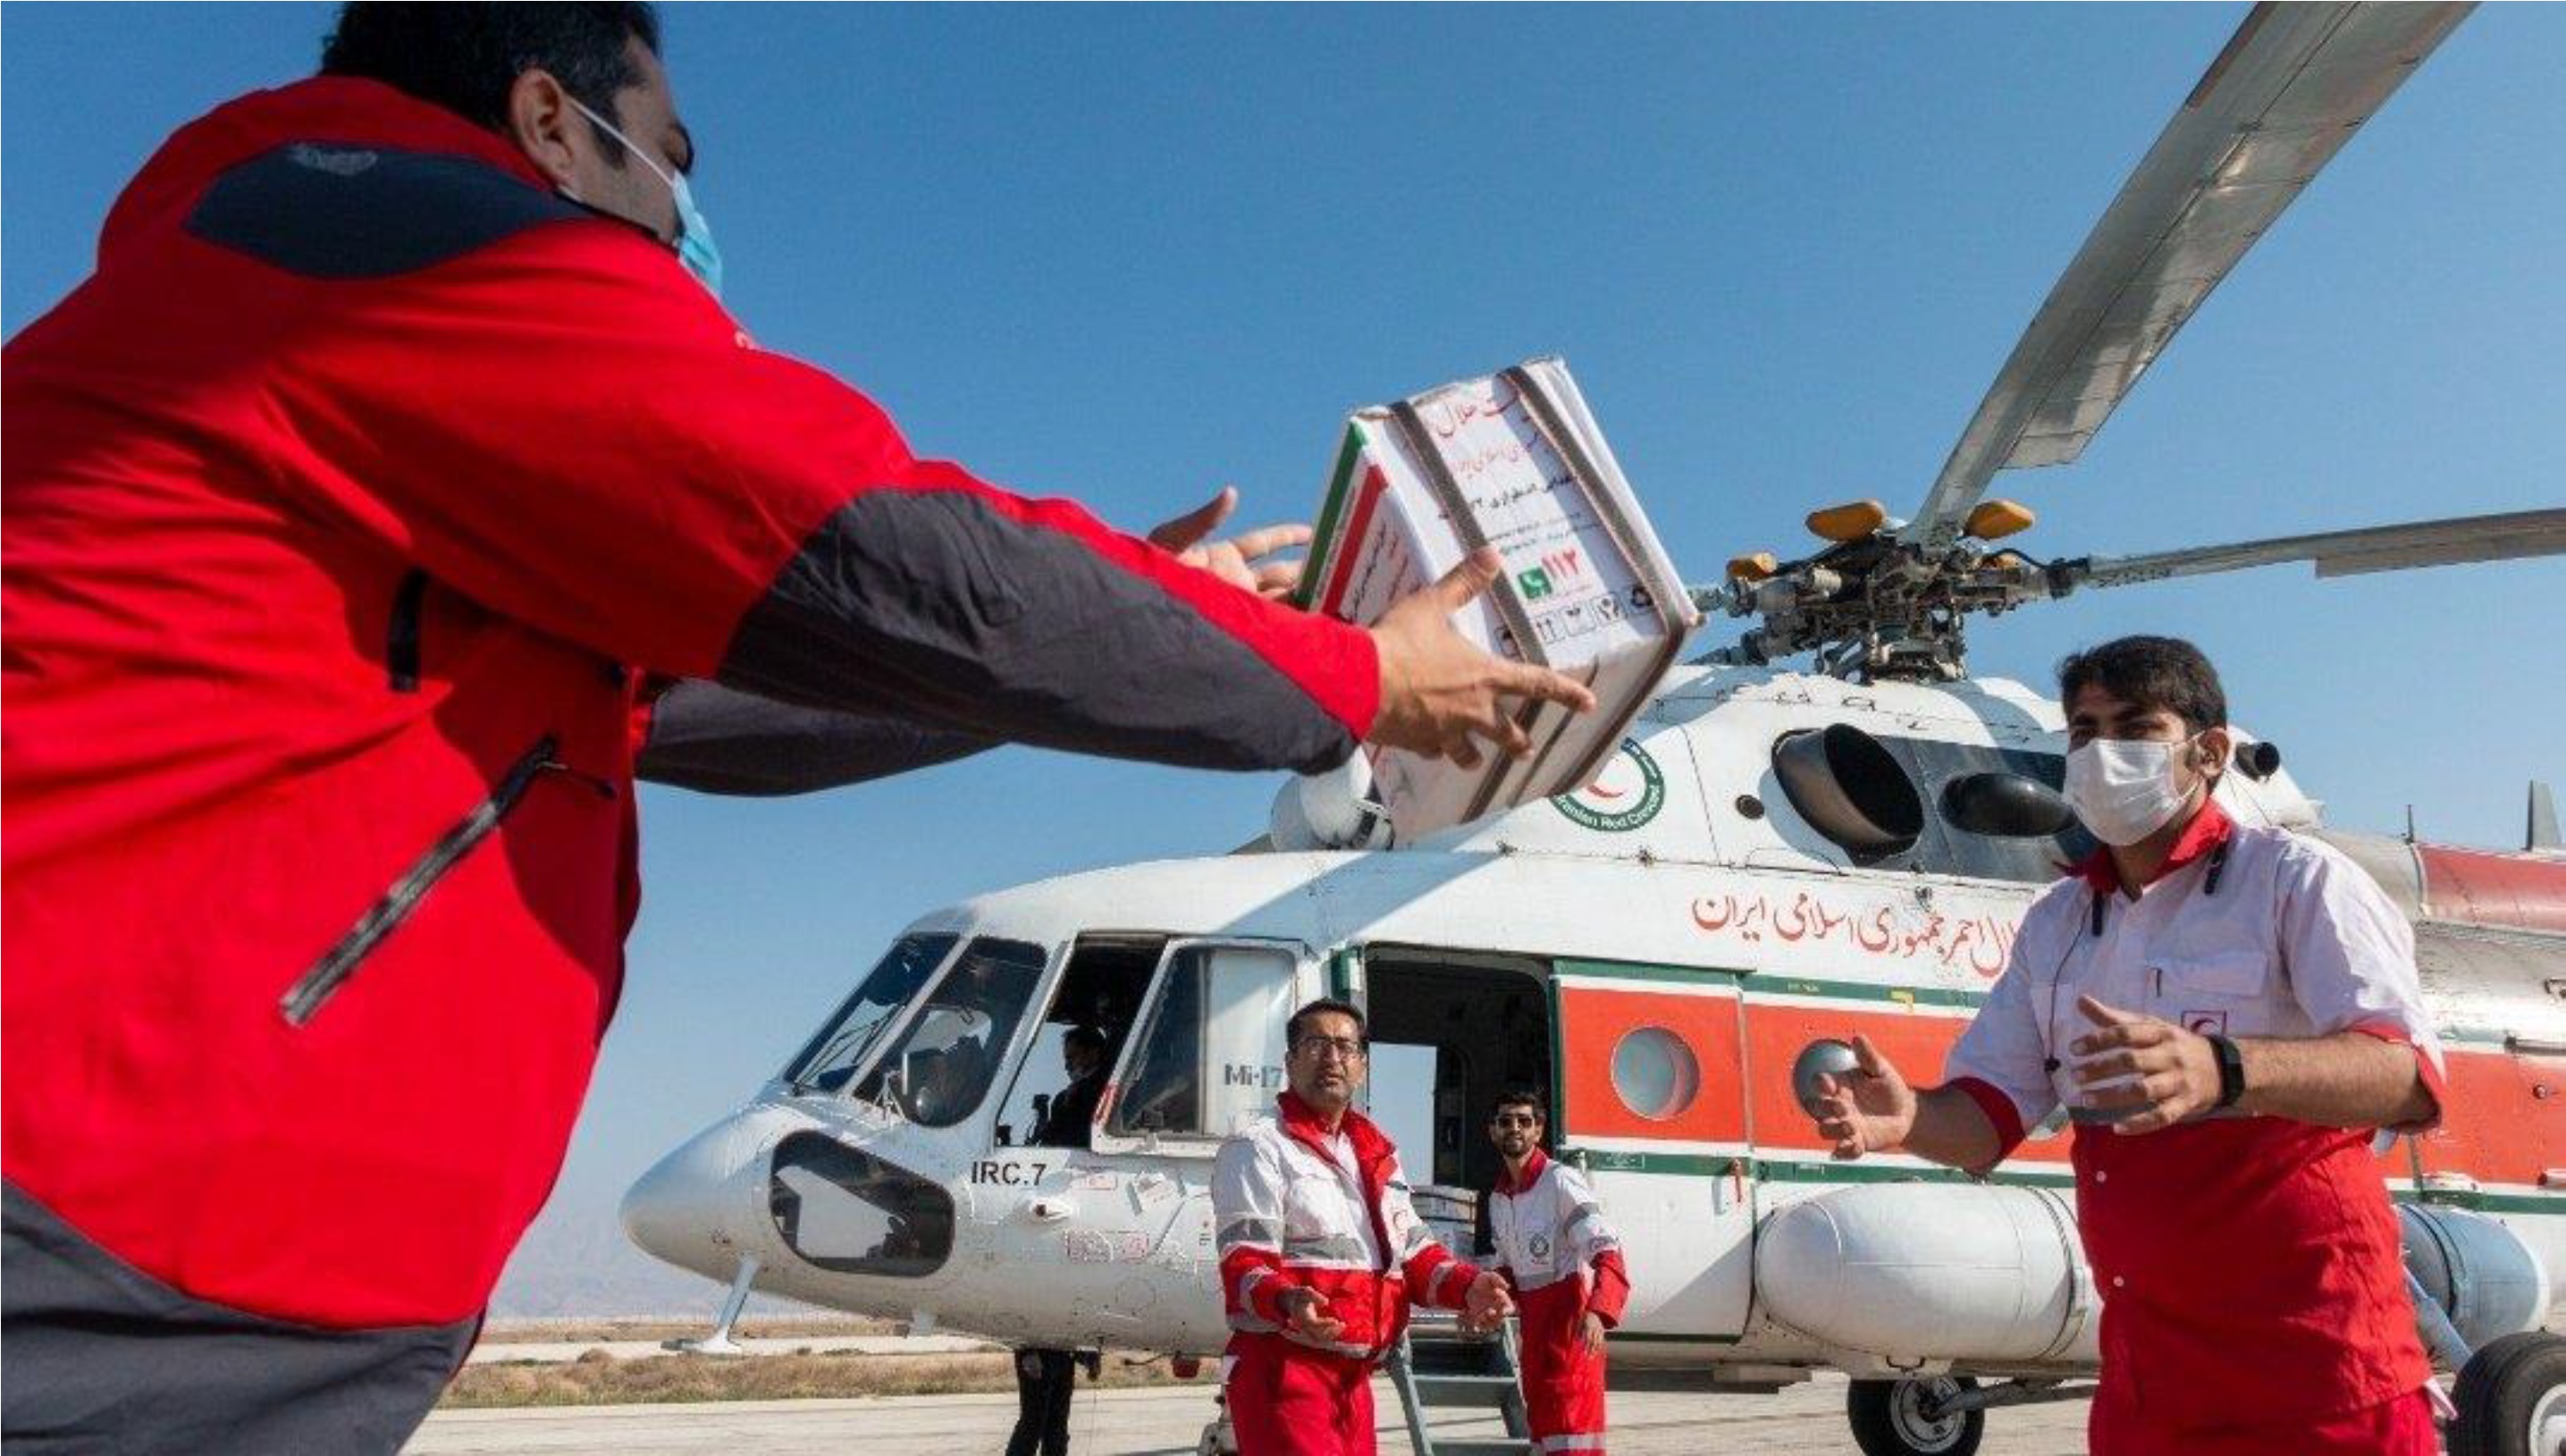 IFRC Disaster Response Emergency Fund: Engaging Private Sector Insurance to Scale Capacity